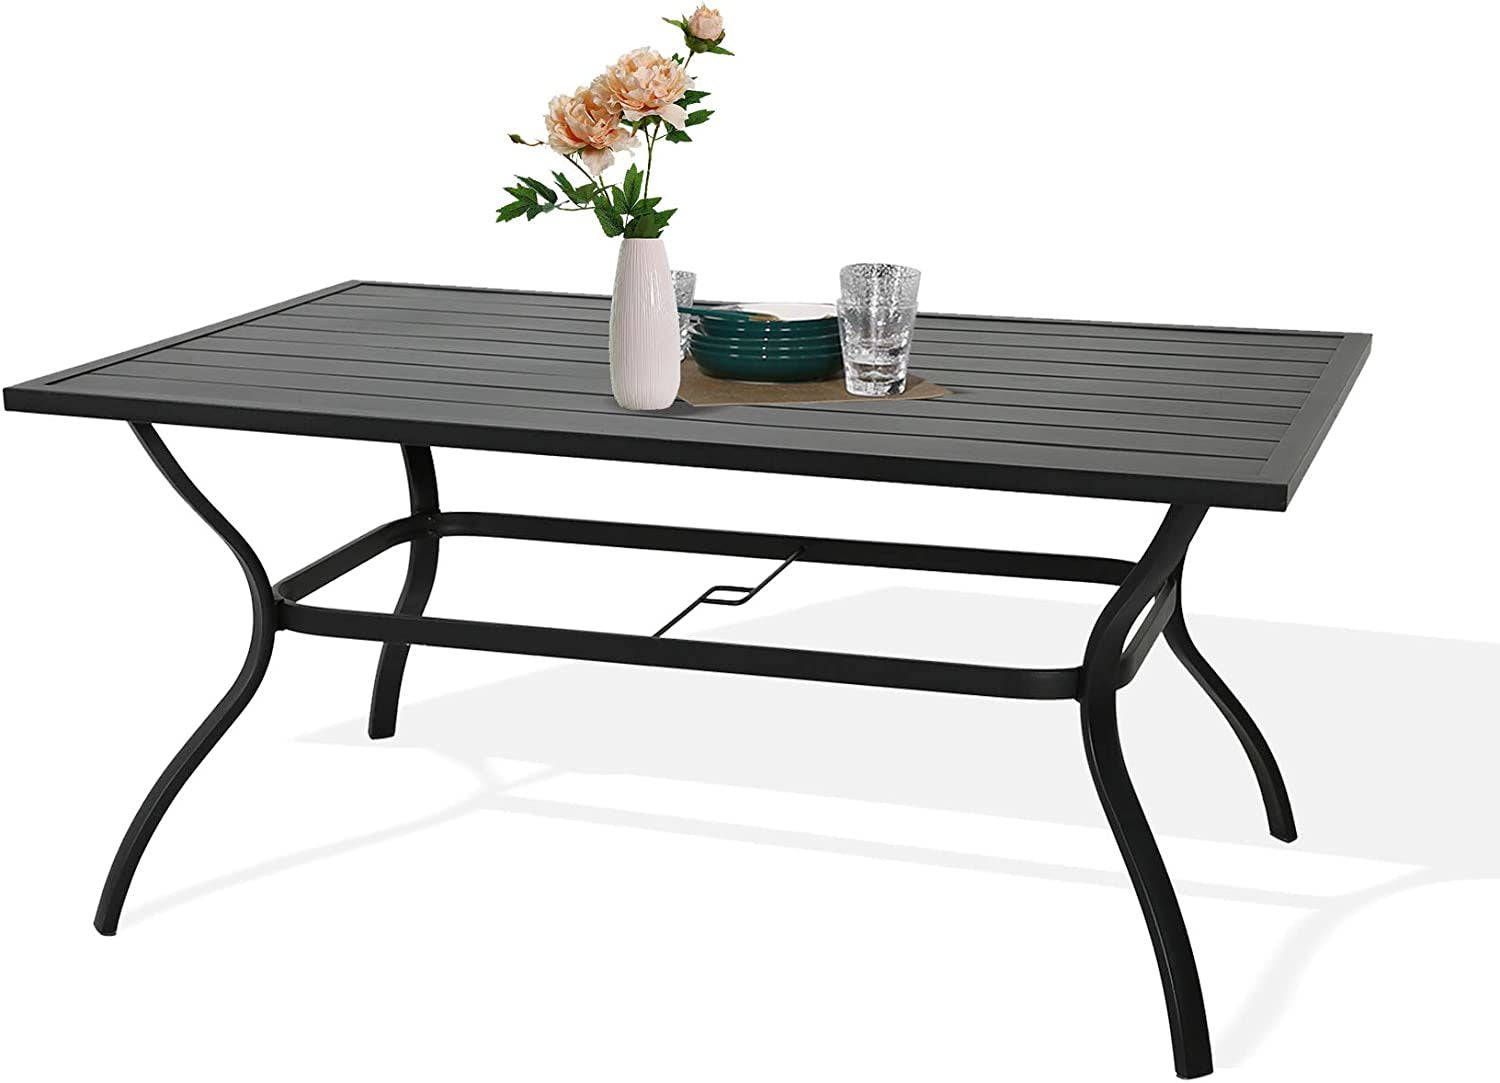 Outdoor Metal Slat Dining Table Patio Rectangle Bistro Table Outdoor Furniture Garden Table with Umbrella Hole